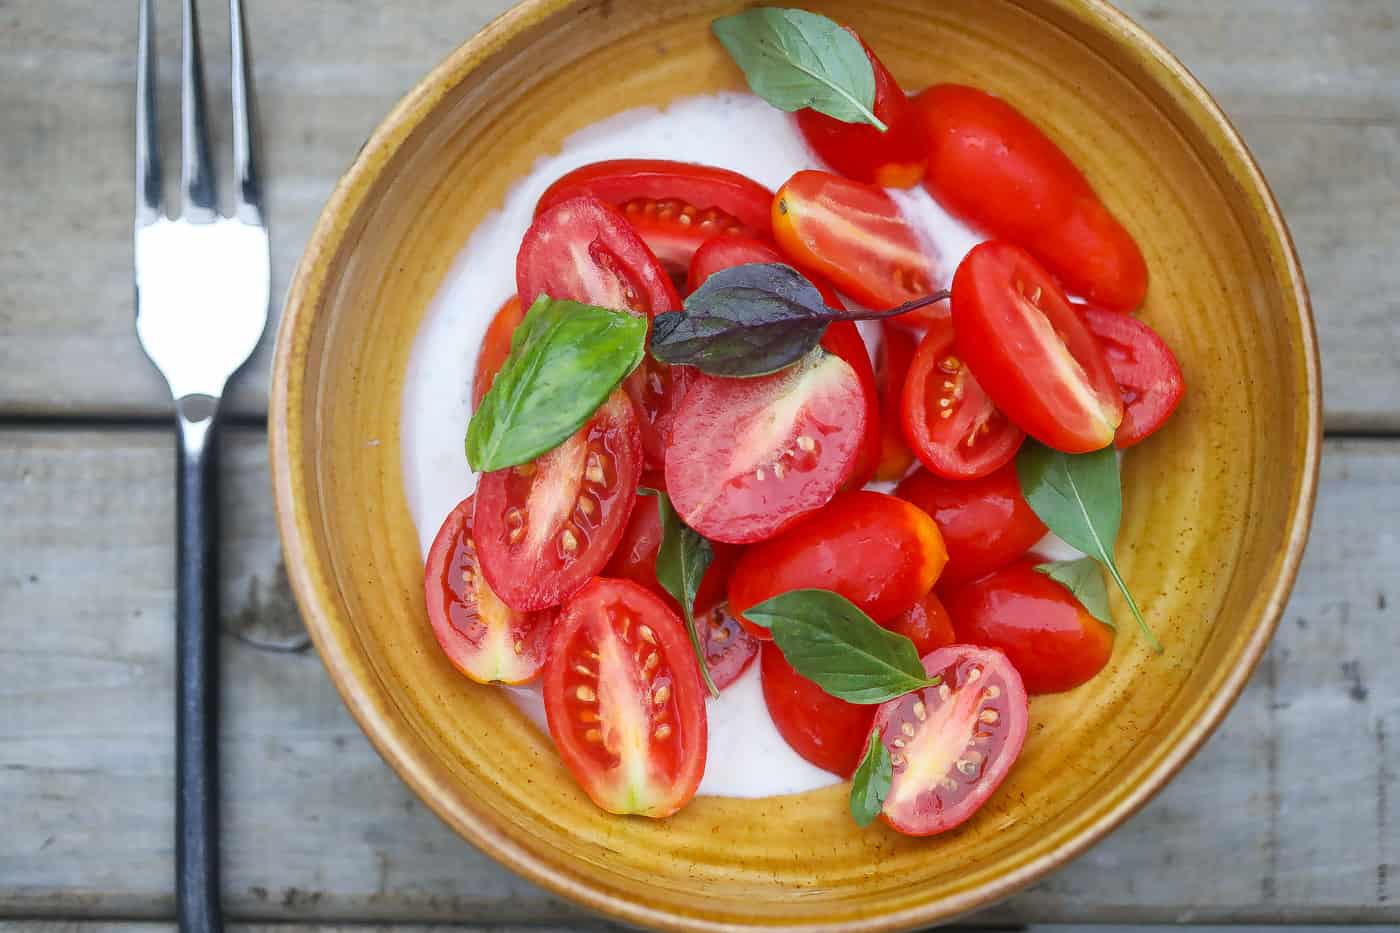 tomatoes and basil in a yellow bowl